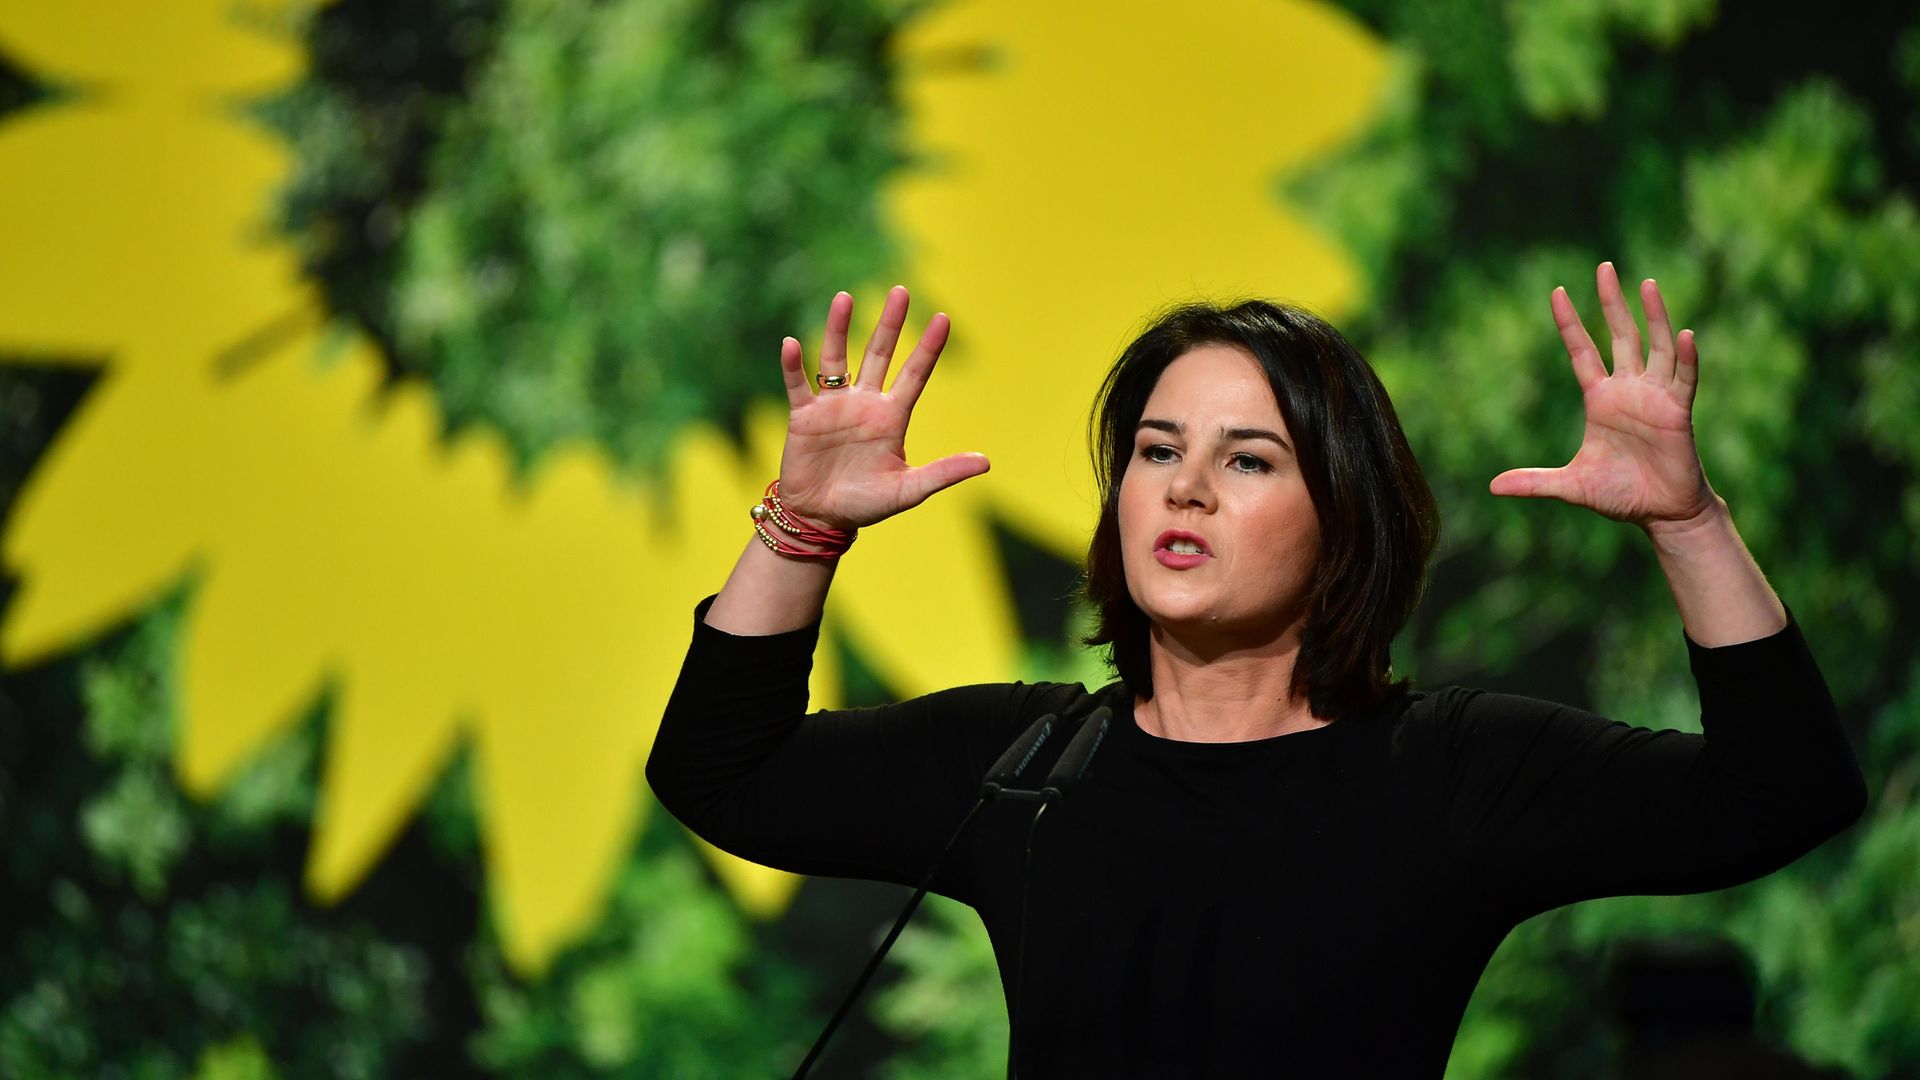 Annalena Baerbock delivers a speech at Germany's Green Party conference in 2019 - Credit: Getty Images